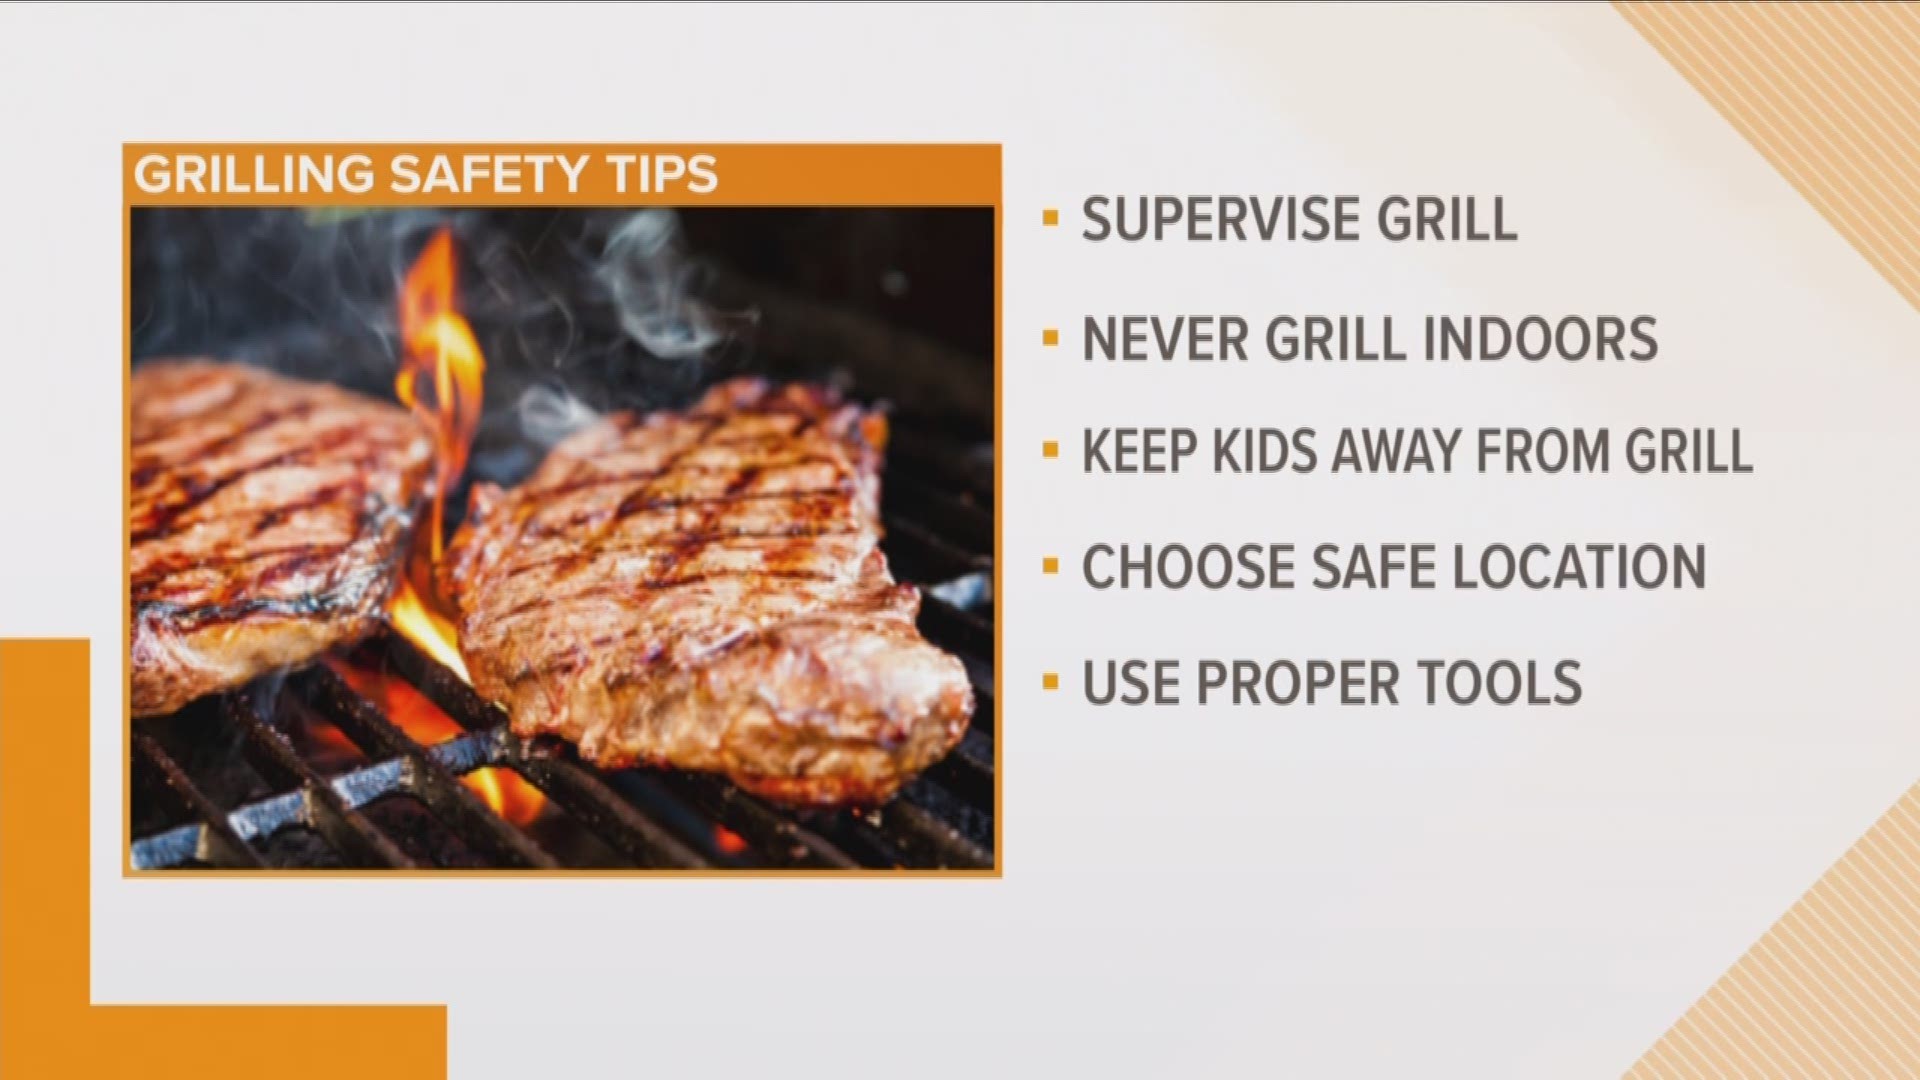 American Red Cross Offers Grilling Safety Tips